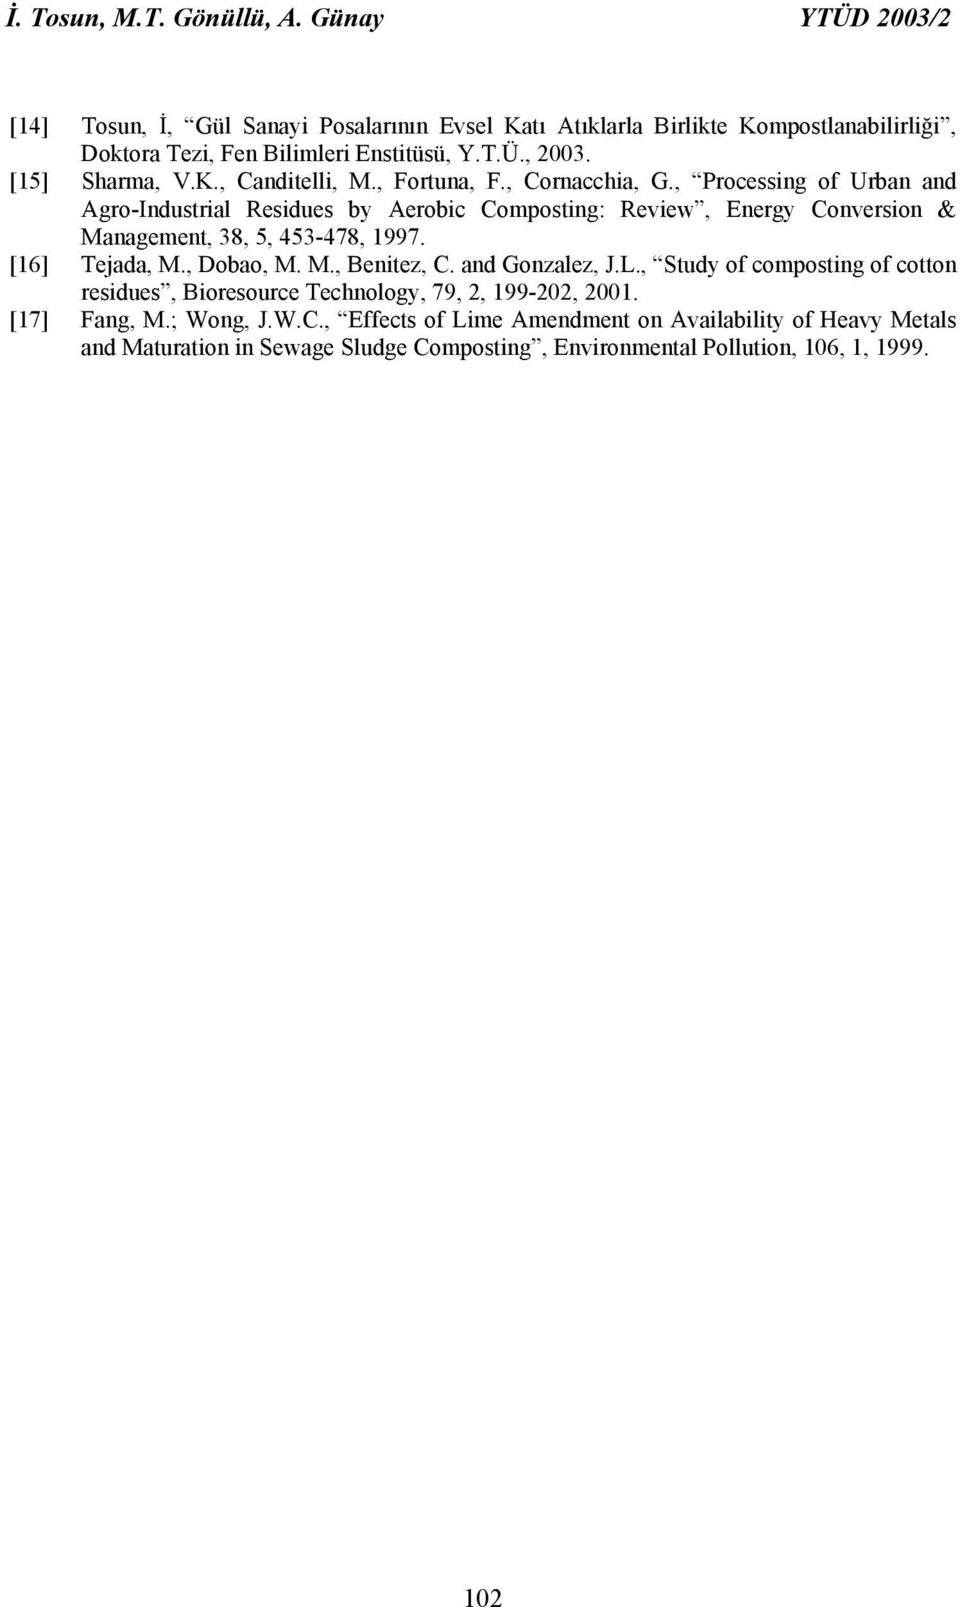 , Processing of Urban and Agro-Industrial Residues by Aerobic Composting: Review, Energy Conversion & Management, 38, 5, 453-478, 1997. [16] Tejada, M., Dobao, M. M., Benitez, C.